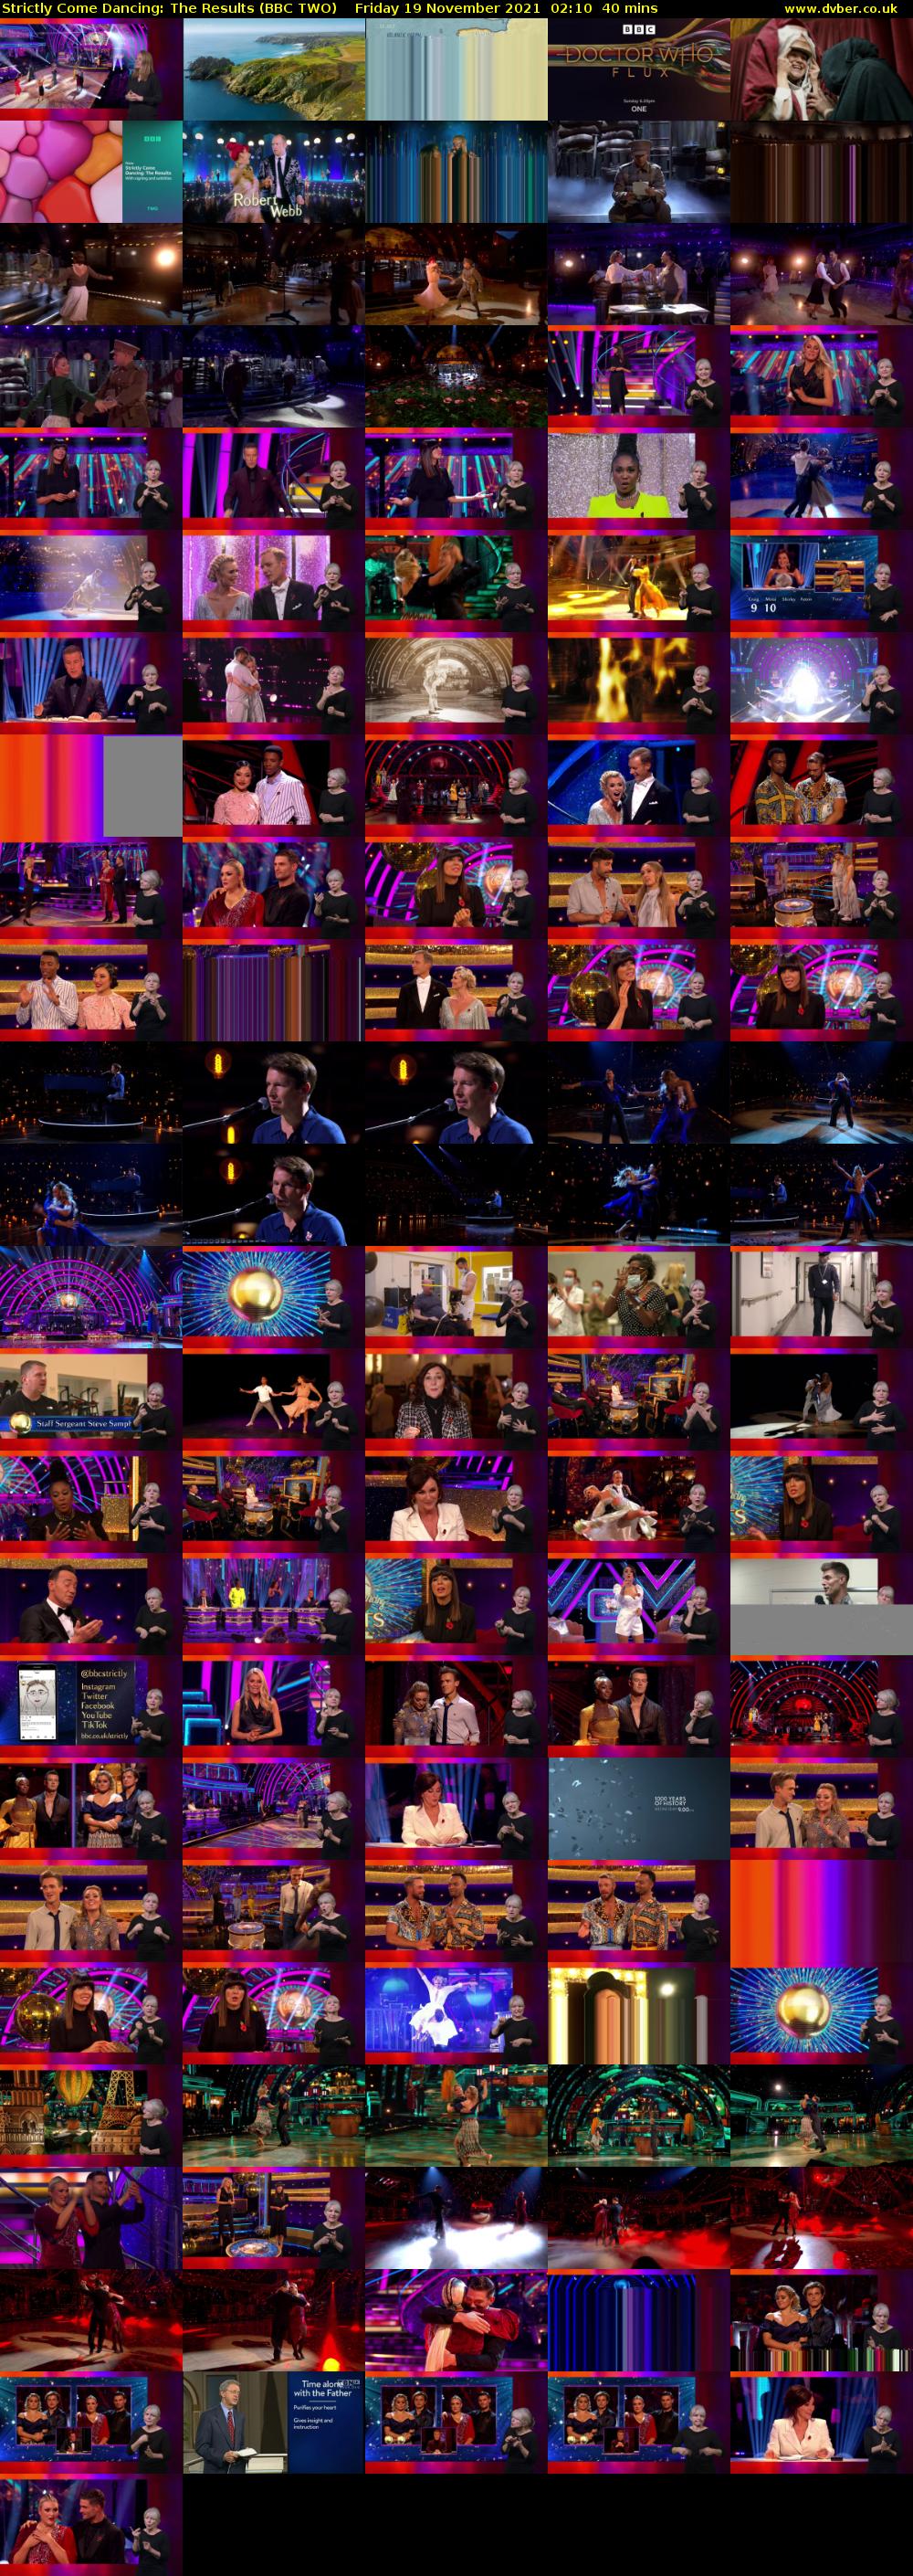 Strictly Come Dancing: The Results (BBC TWO) Friday 19 November 2021 02:10 - 02:50